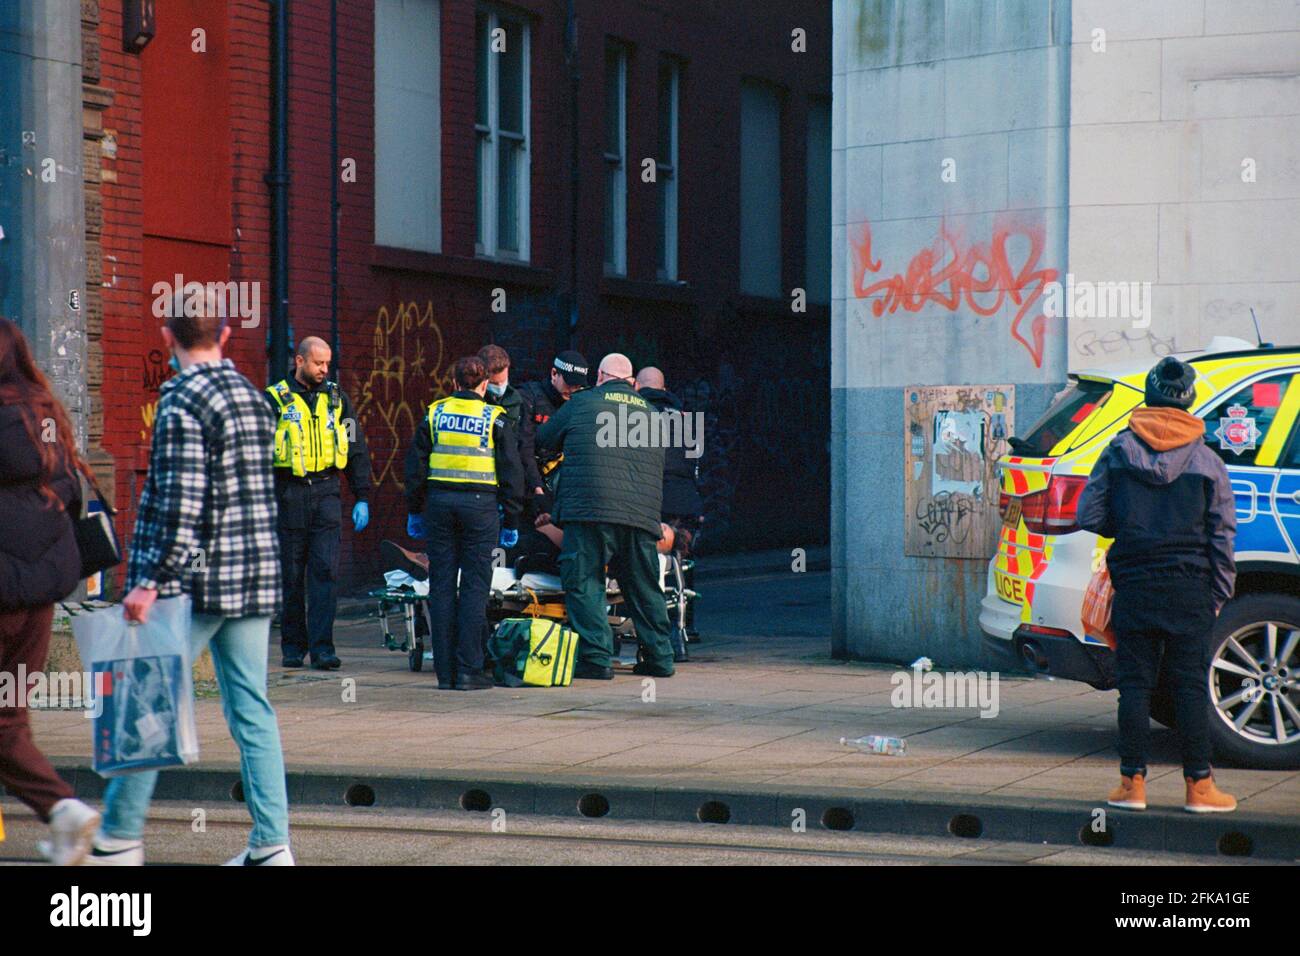 Manchester, UK - 29 December 2020: Emergency service on the High Street. Stock Photo